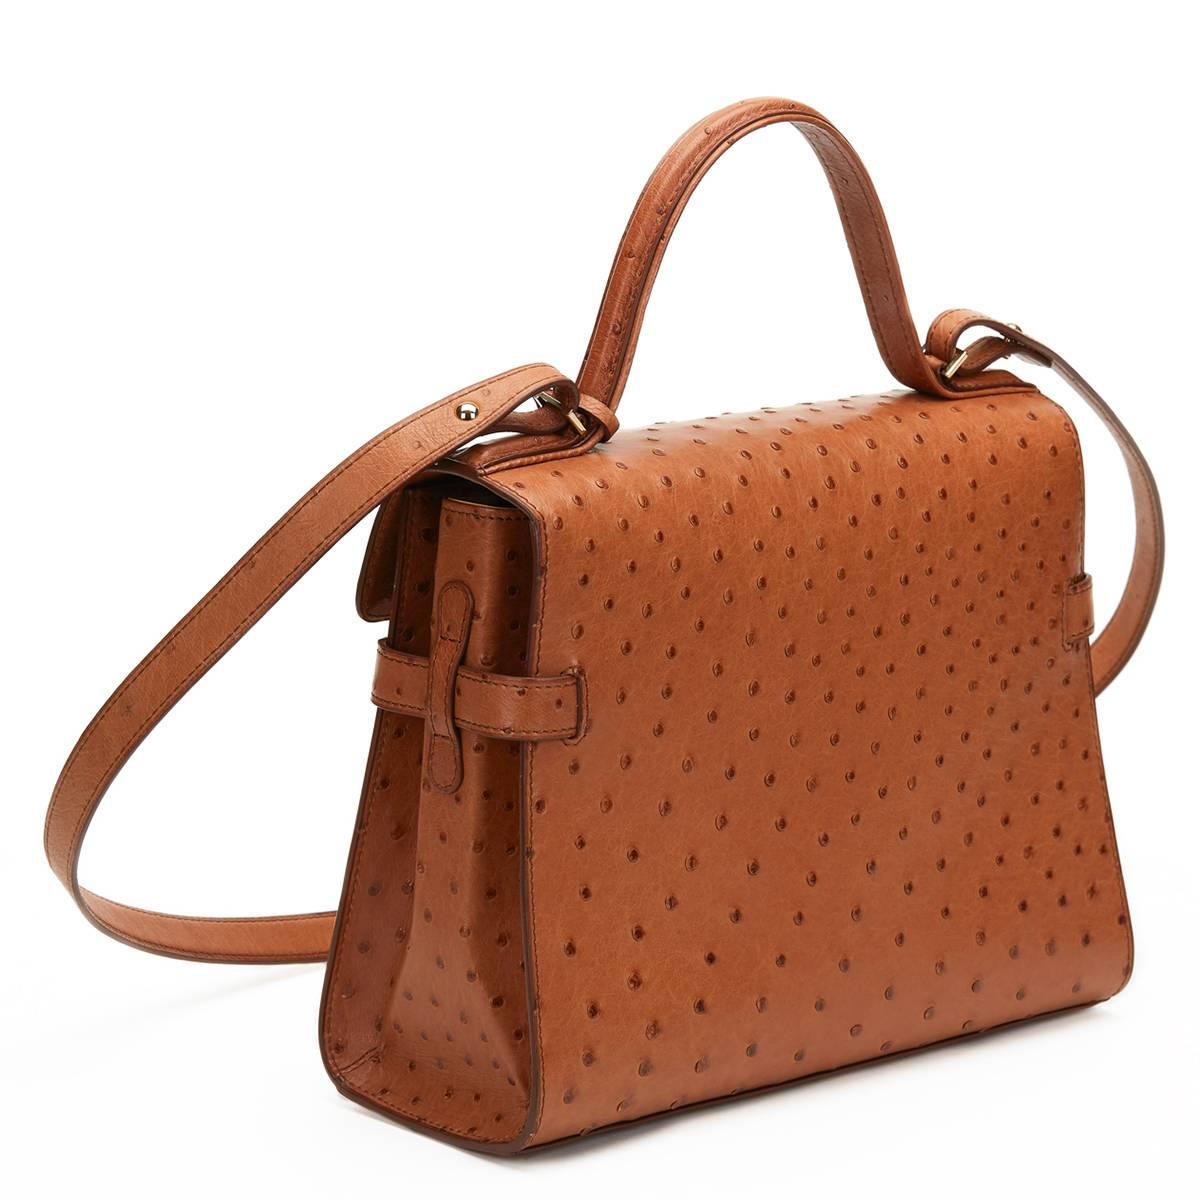 Delvaux
TAN OSTRICH LEATHER TEMPETE MM 2000'S

This ladies Delvaux Tempete MM is primarily made from tan ostrich leather complimented by gold hardware. This bag is in excellent pre-owned condition accompanied by Shoulder strap, compact mirror.